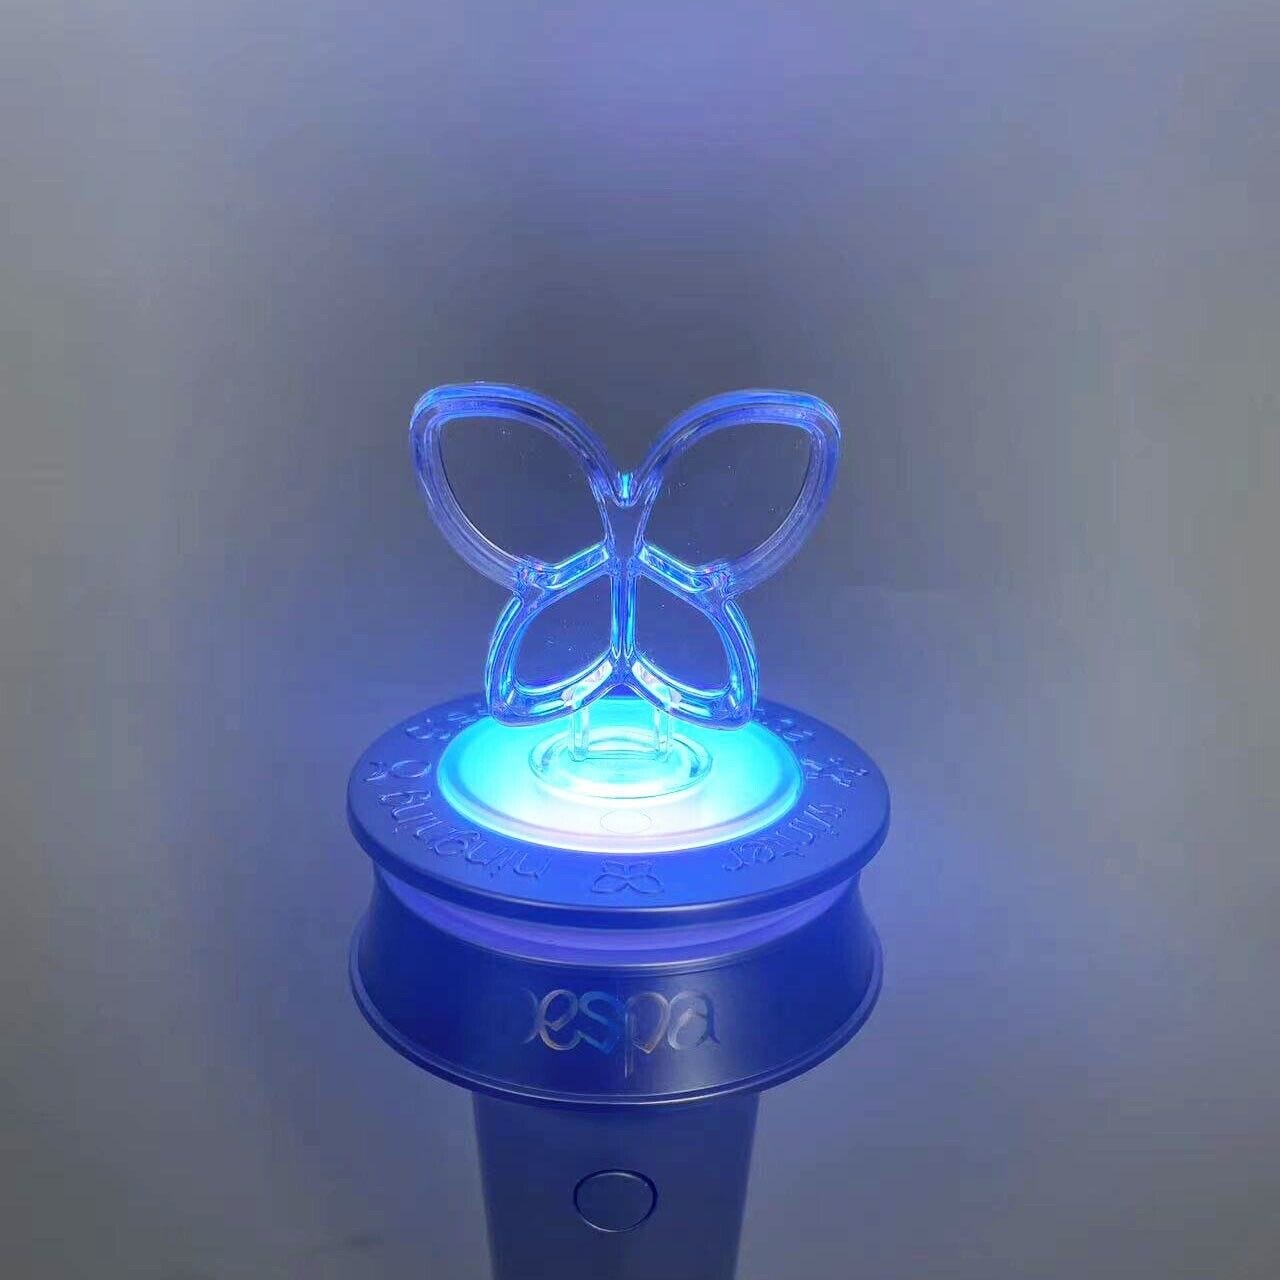 Image of Ningning's butterfly lightstick topper on the aespa lightstick